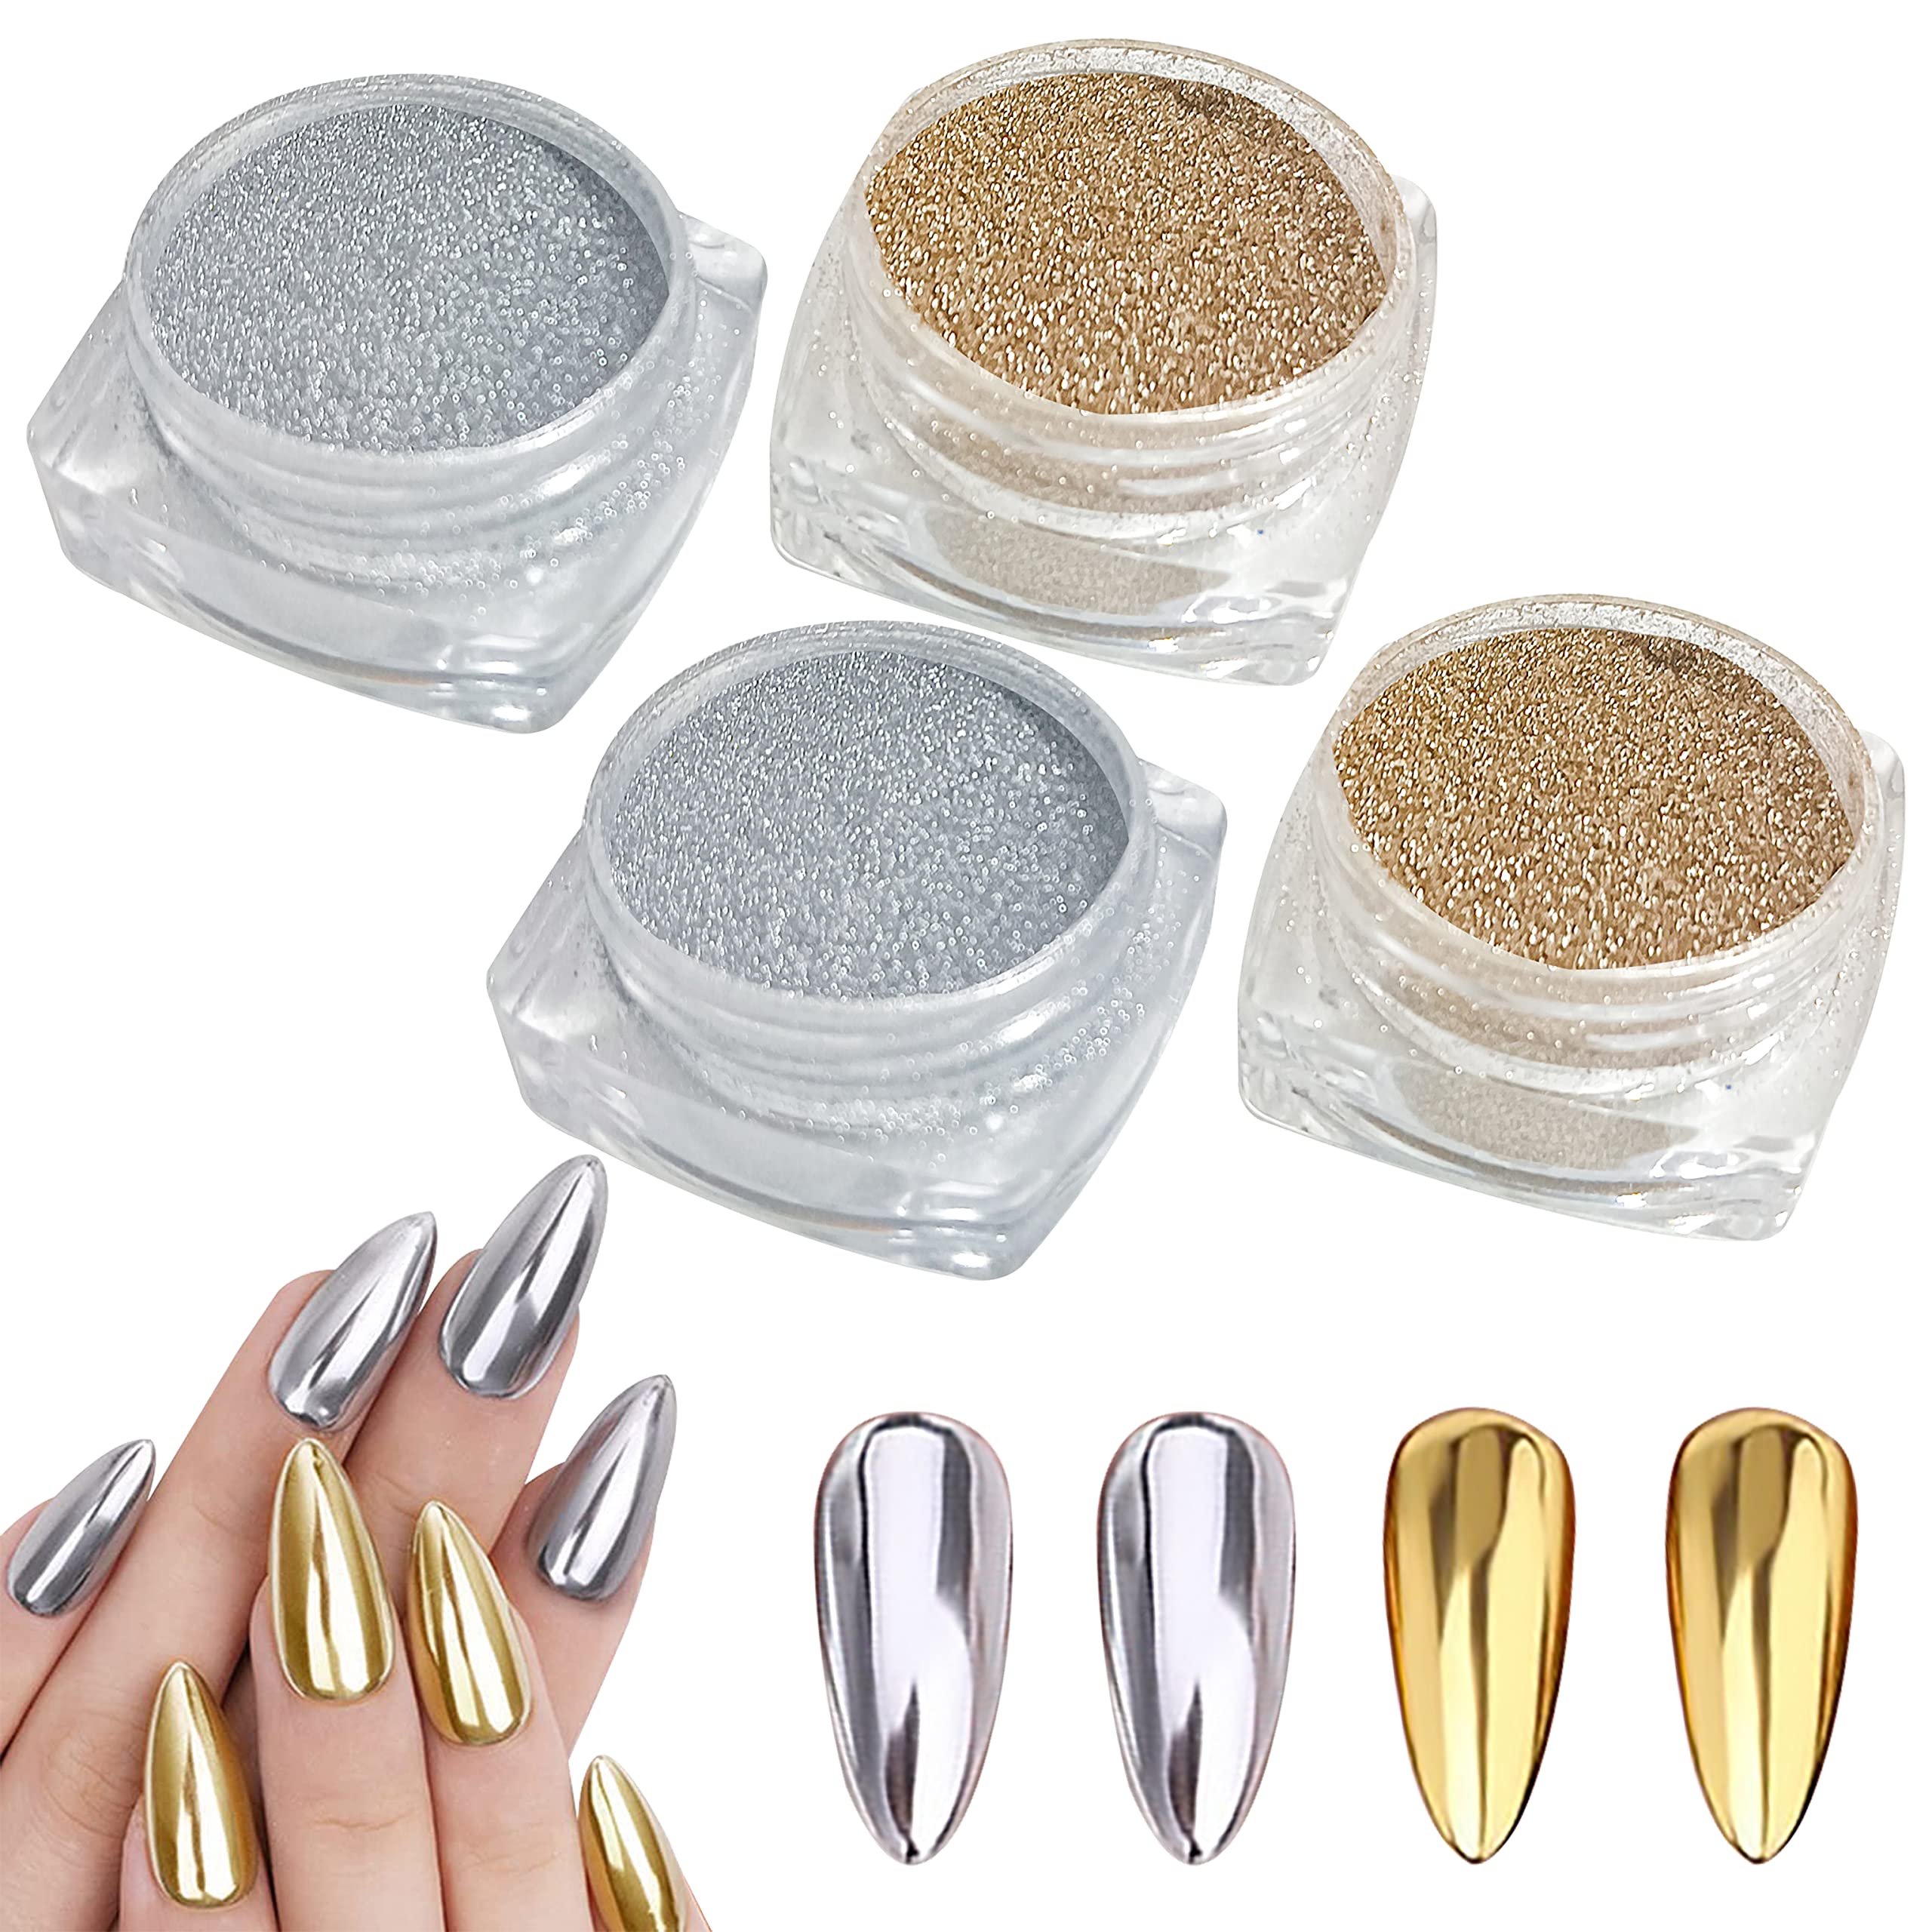  Gold Chrome Nail Powder - Christmas Nails Mirror Effect  Metallic Nail Powder Manicure Pigment, High Gloss Glitter Chrome Nail Art  Dust Nail Powder. : Beauty & Personal Care